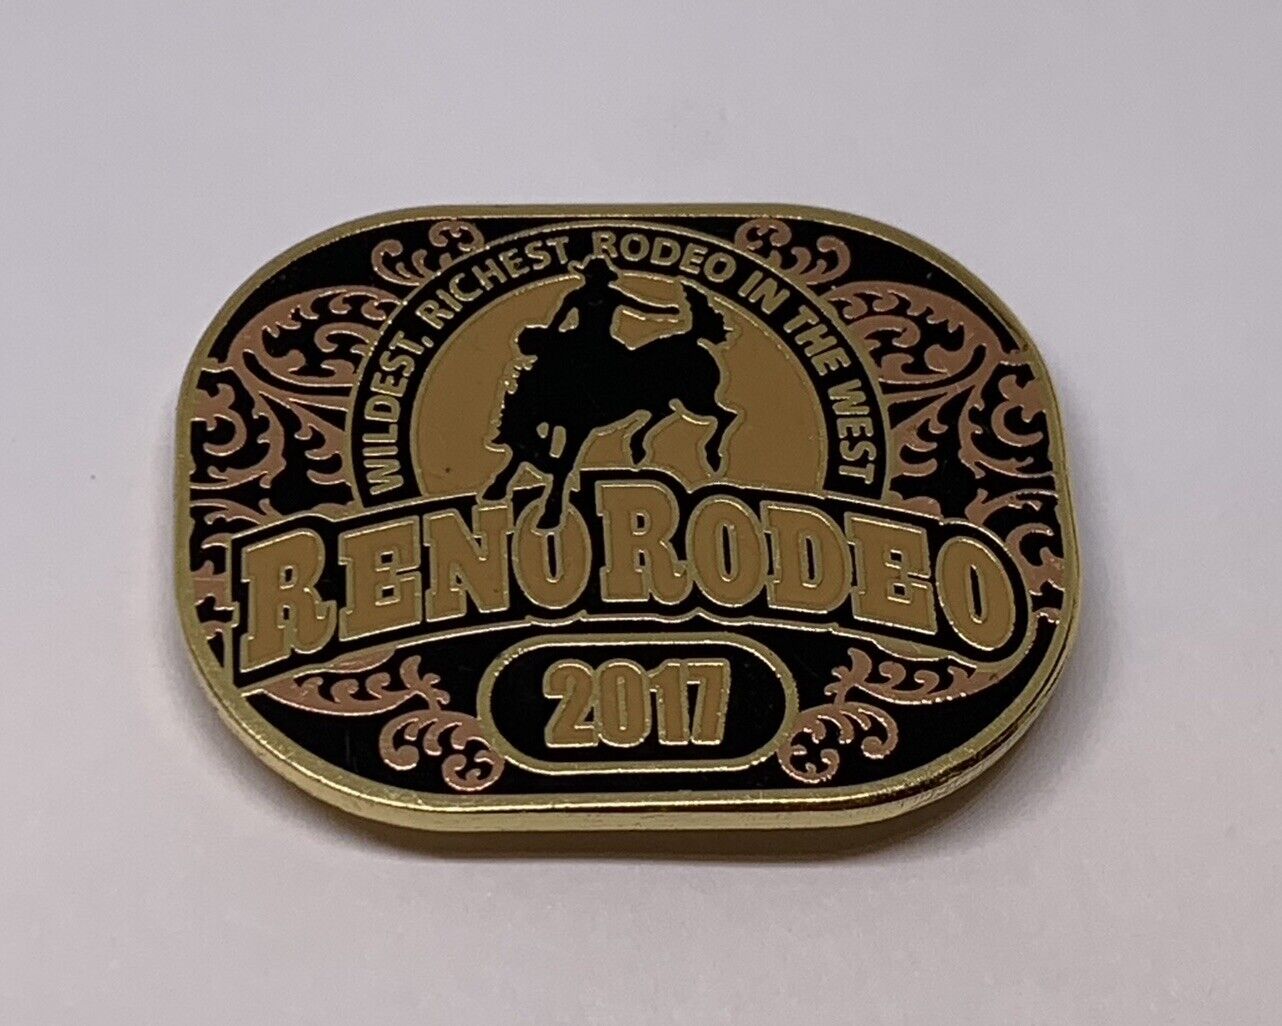 Reno Nevada Rodeo 2017 Wildest Richest In The West Lapel Pin (174)